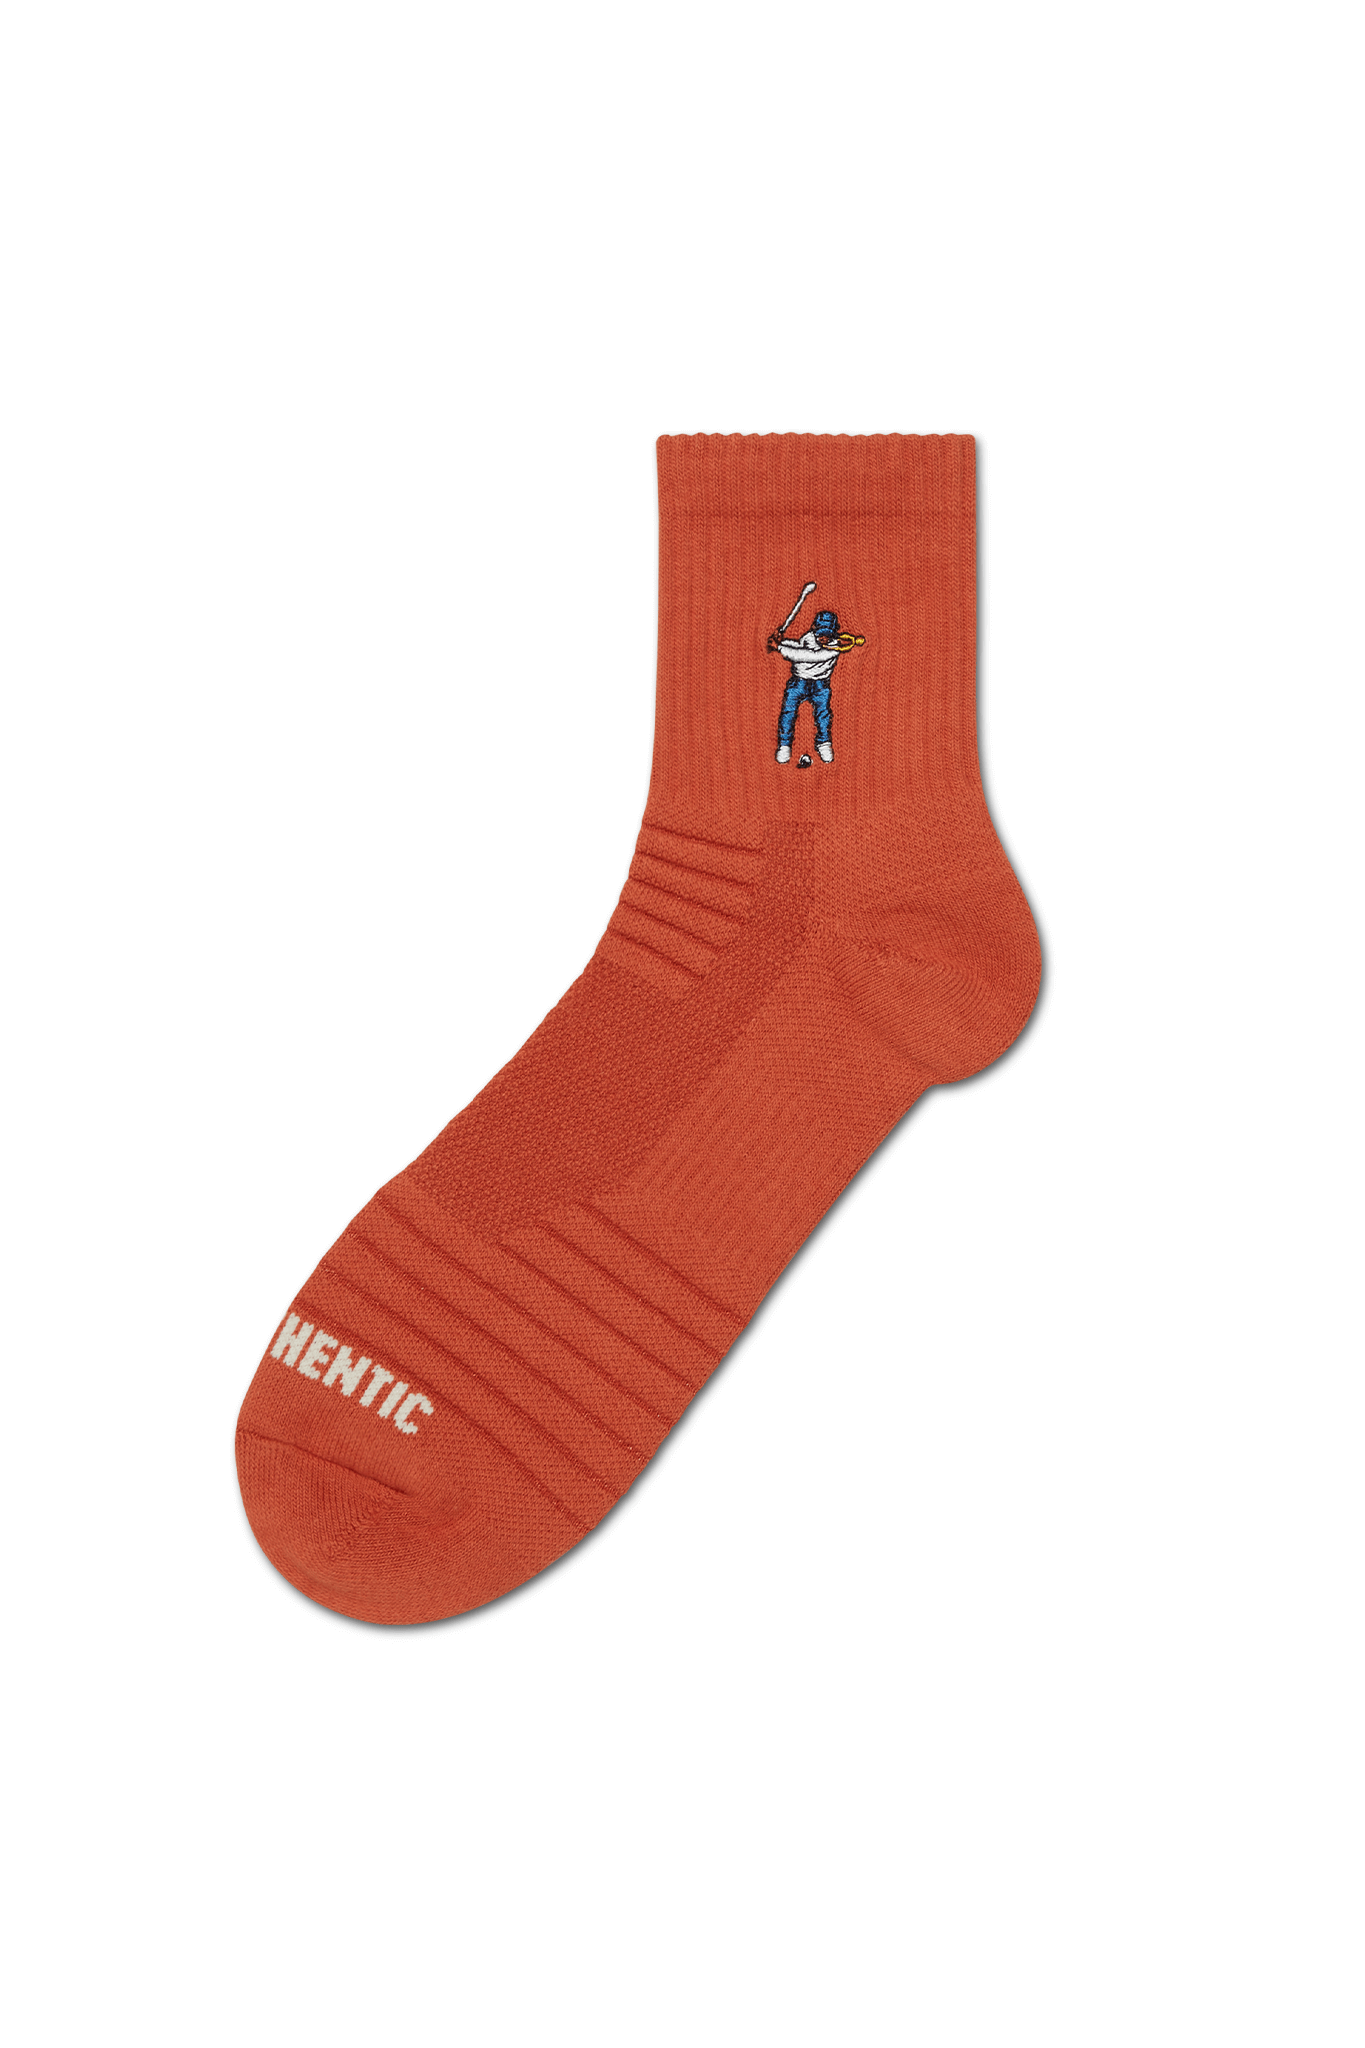 Eastside Golf Player Logo Ankle Height Socks Red Clay